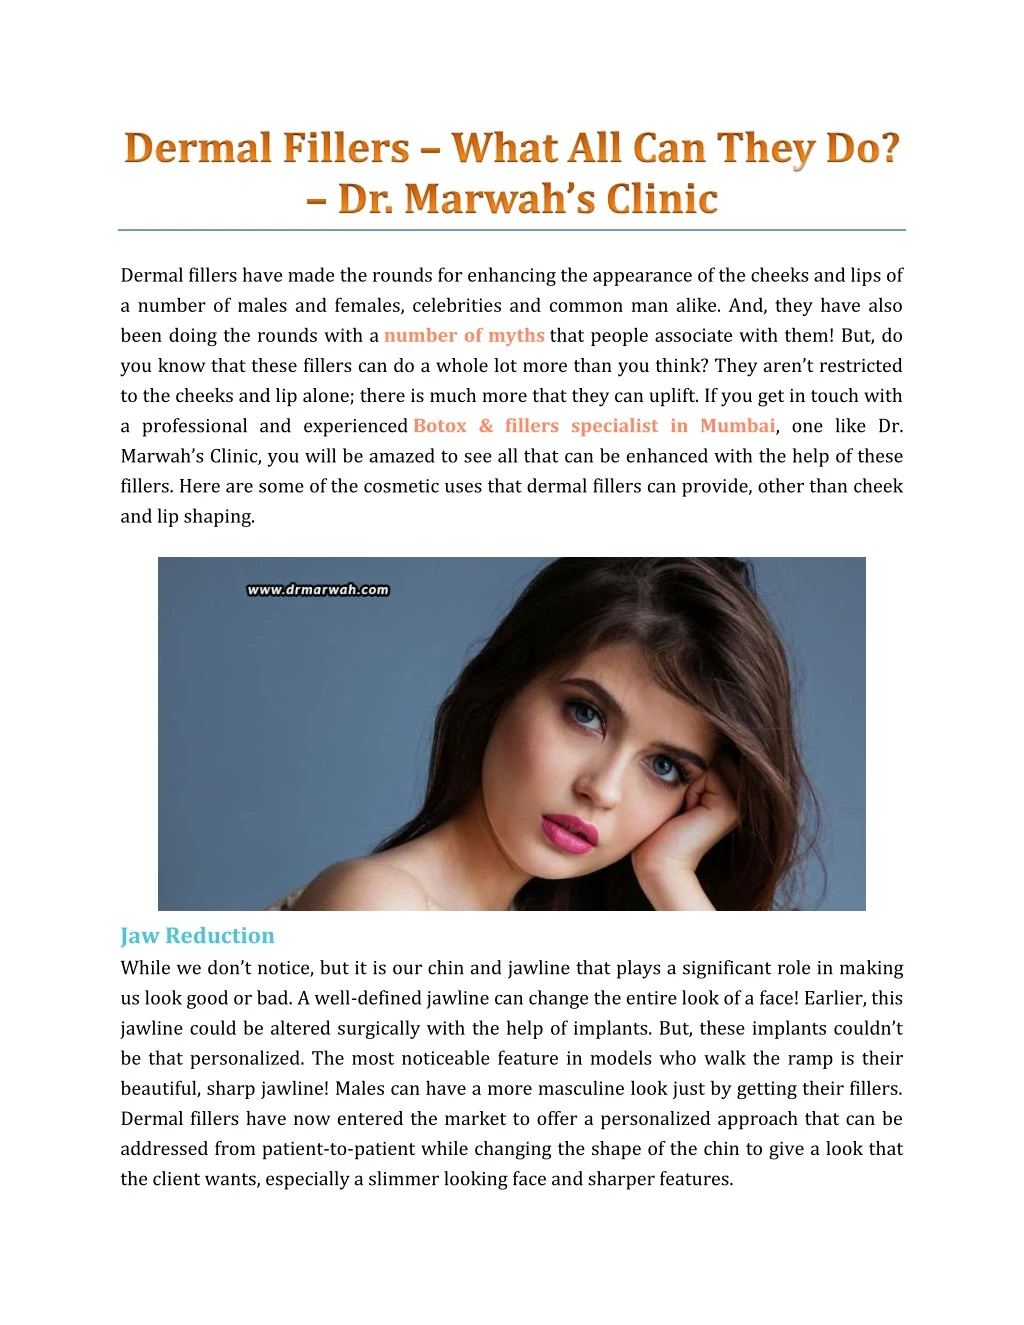 dermal fillers have made the rounds for enhancing